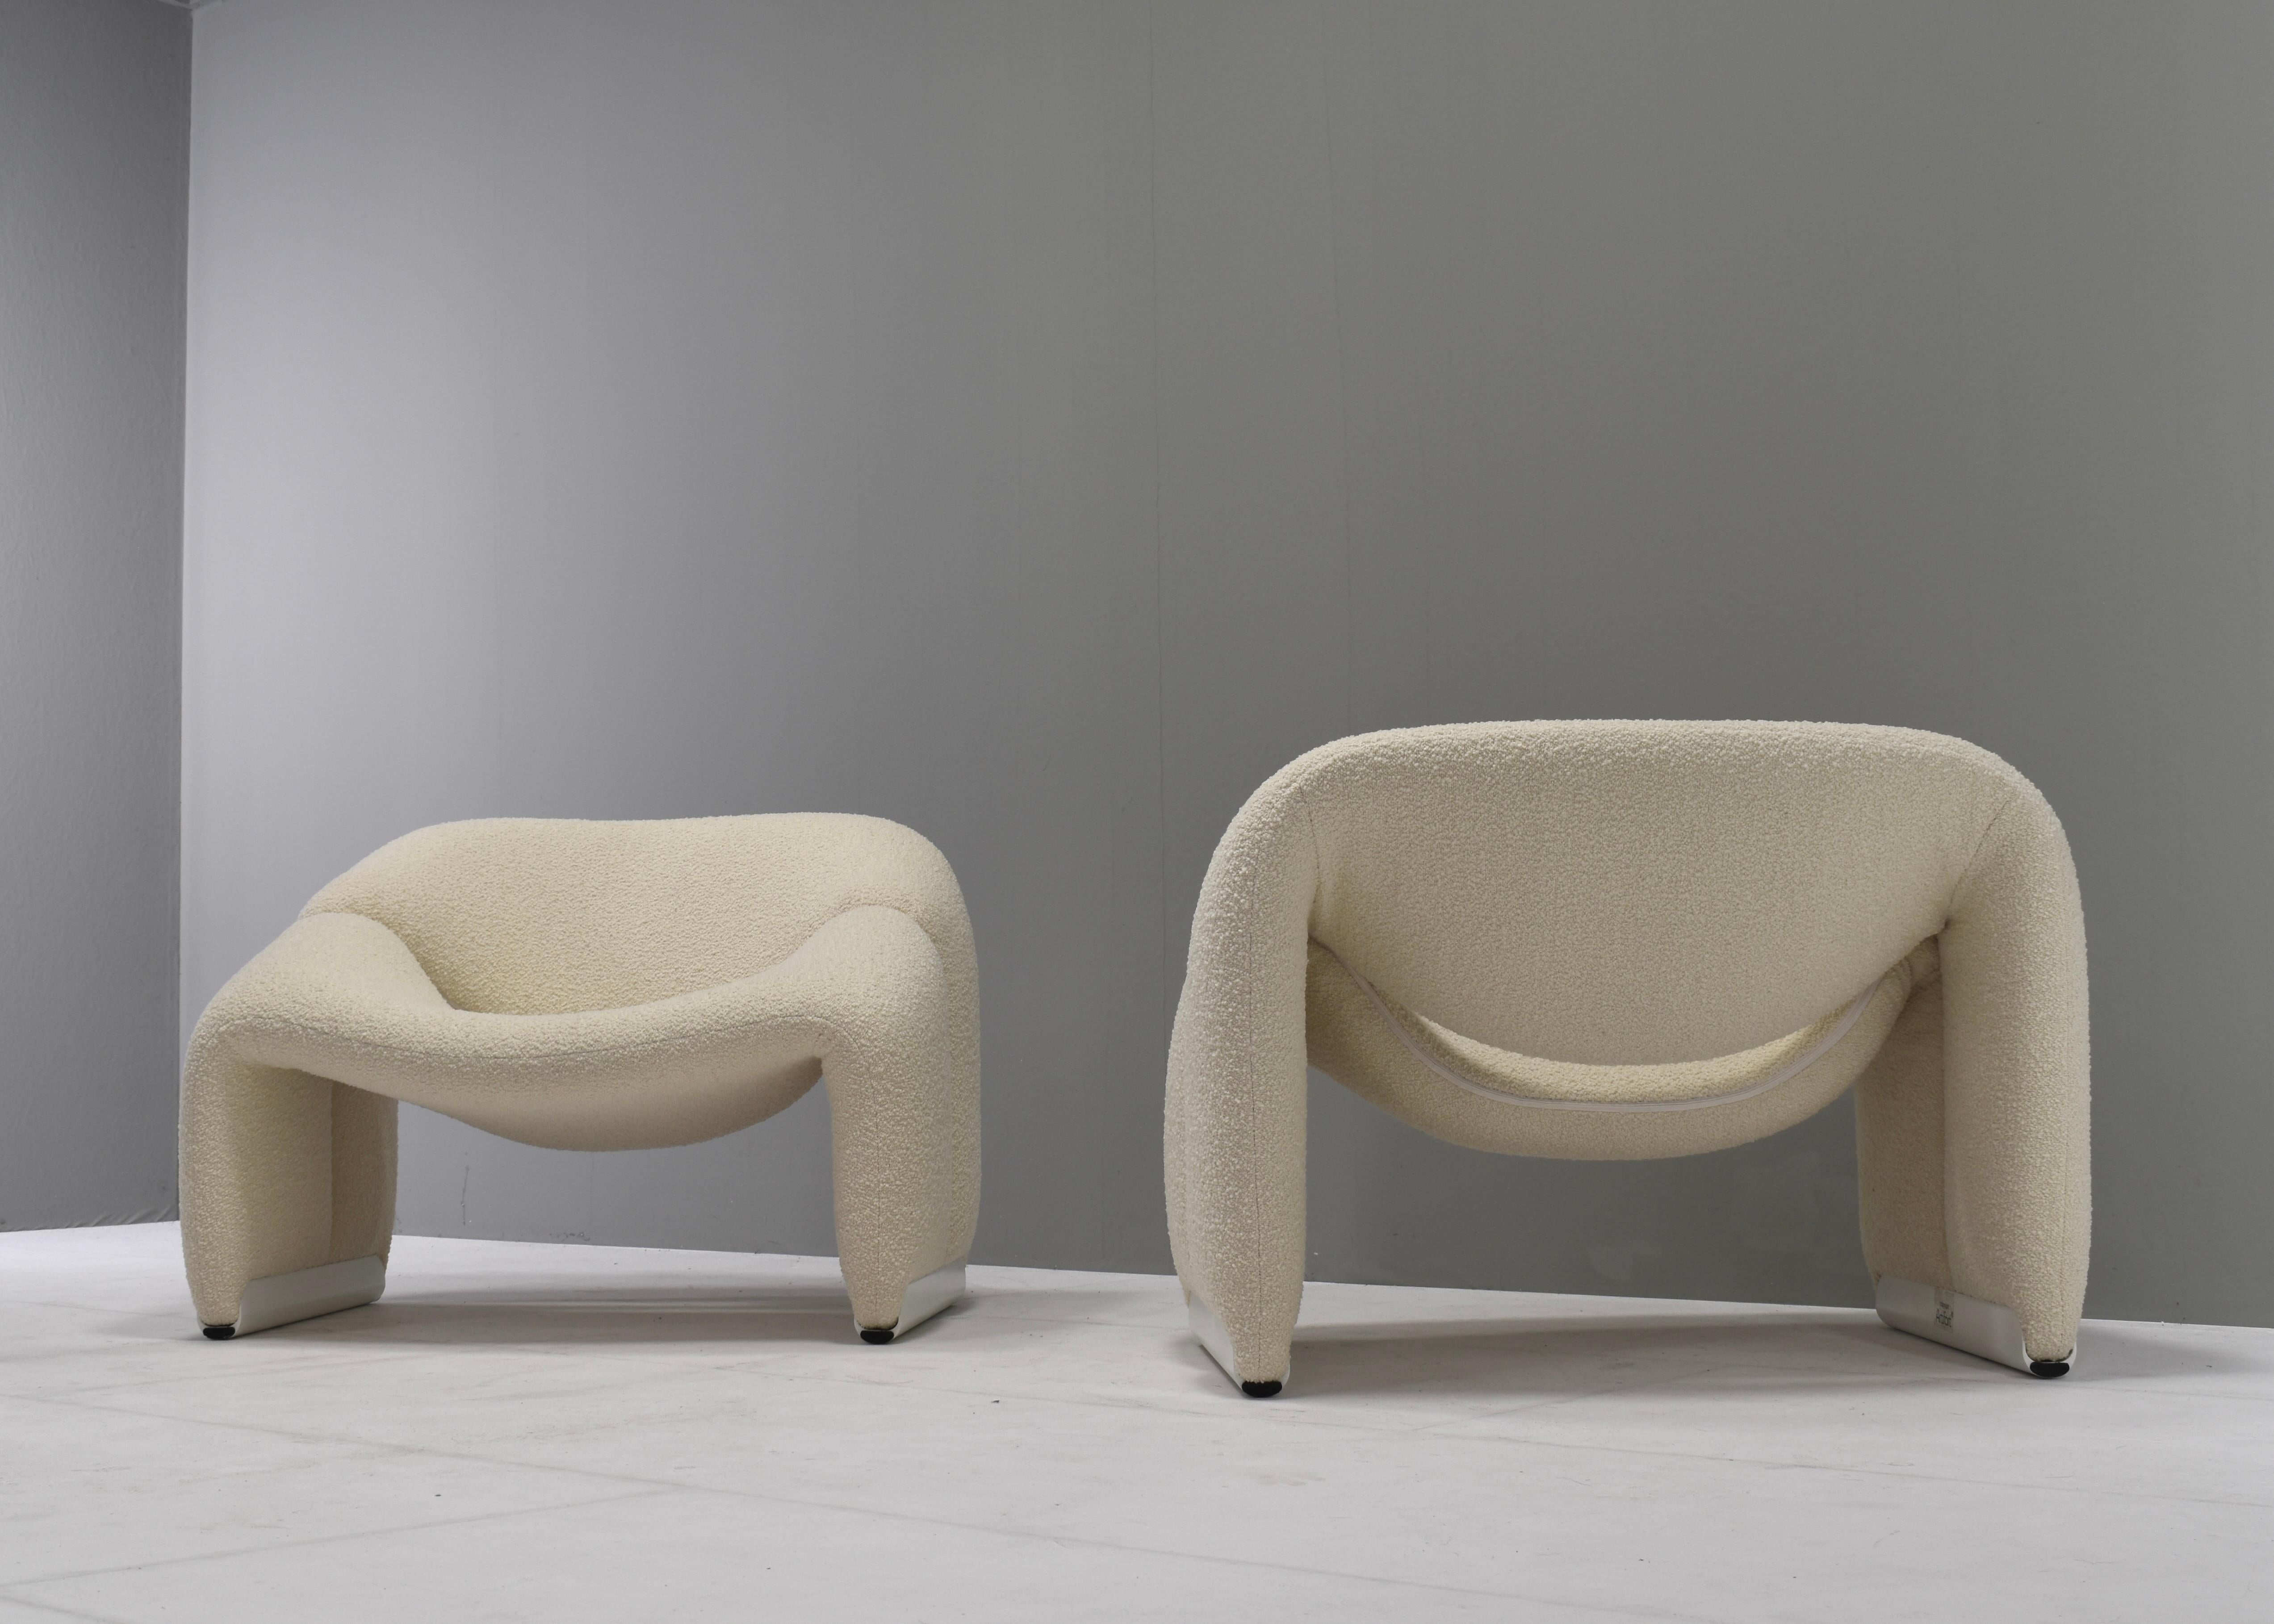 Dutch Pair of Pierre Paulin F598 Groovy Armchairs for Artifort in New Upholstery, 1972